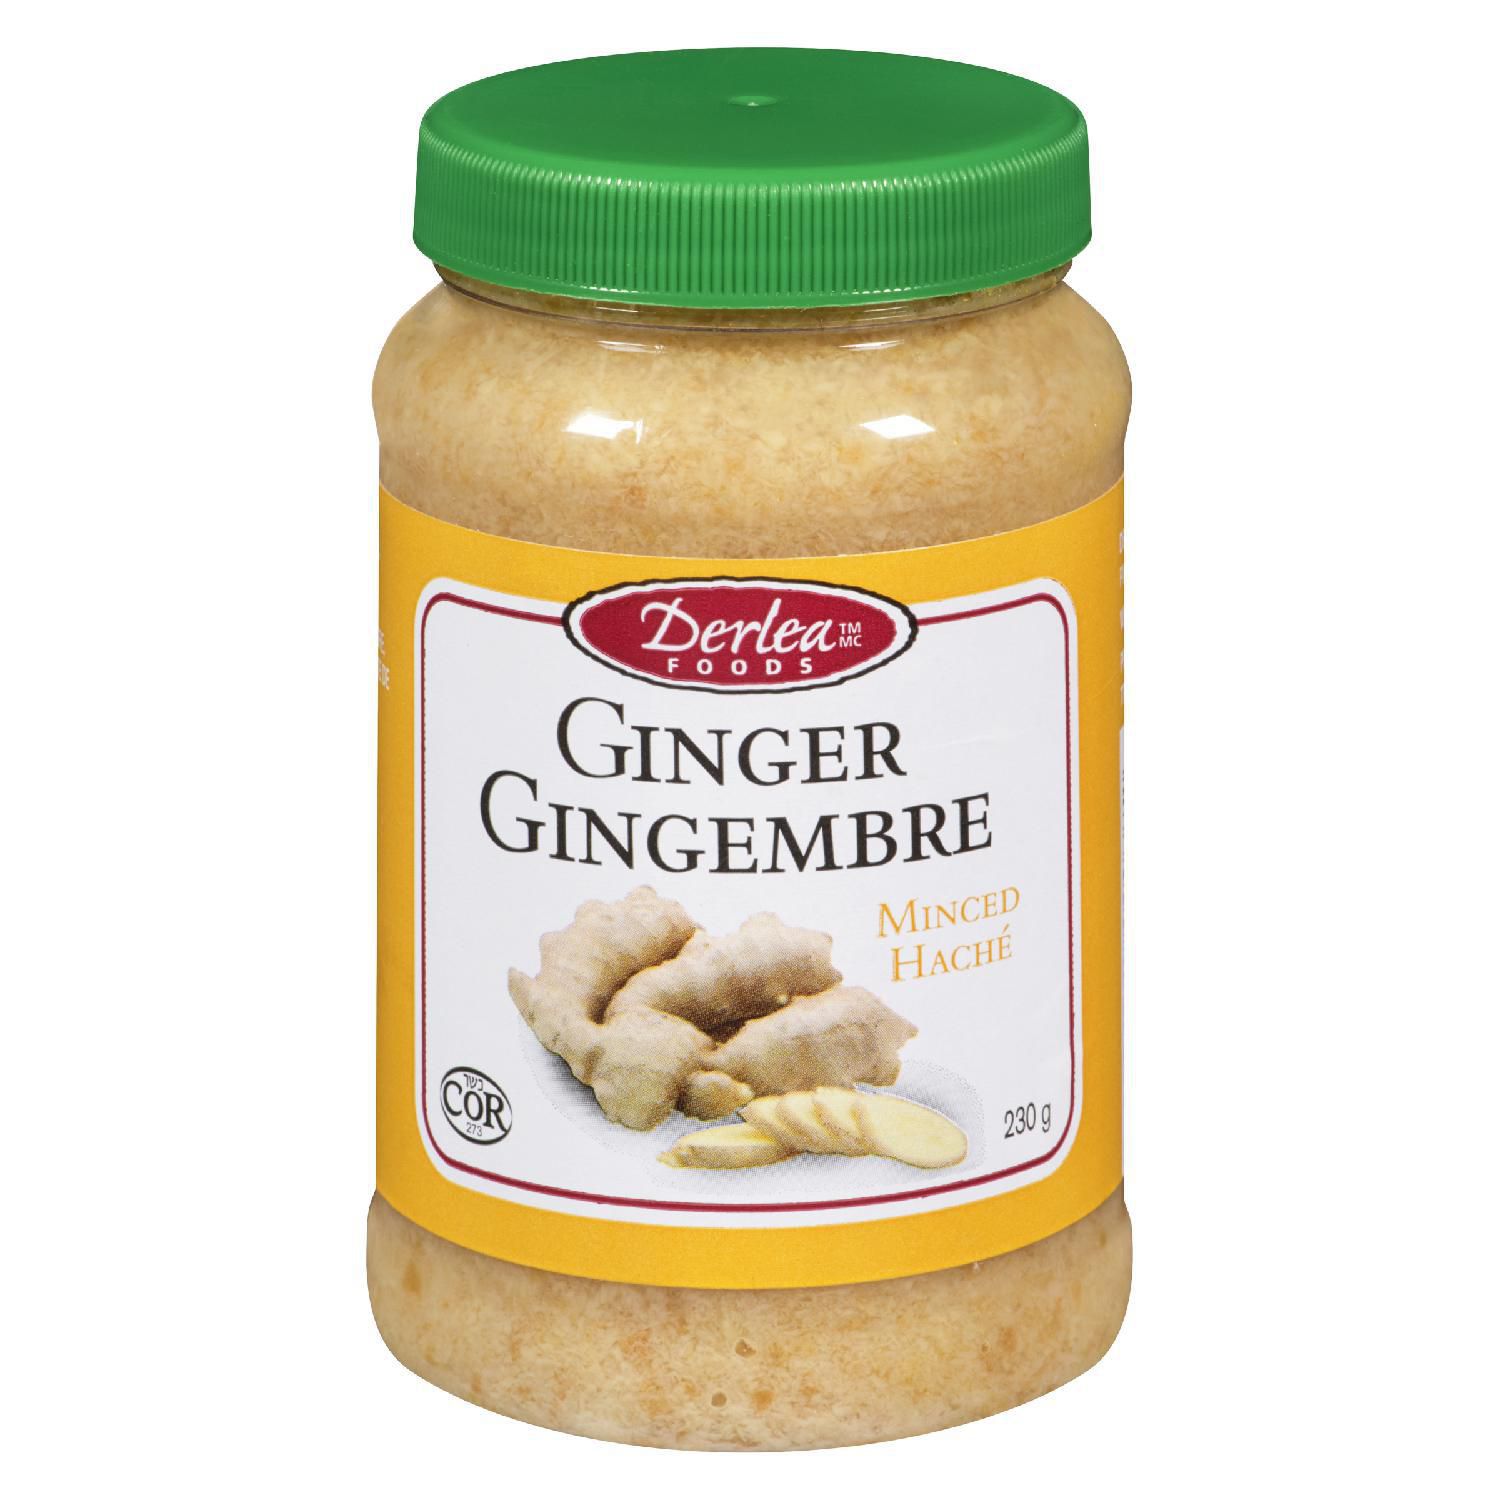 Buy Minced Ginger Online | Walmart Canada Where Is Minced Ginger In The Grocery Store